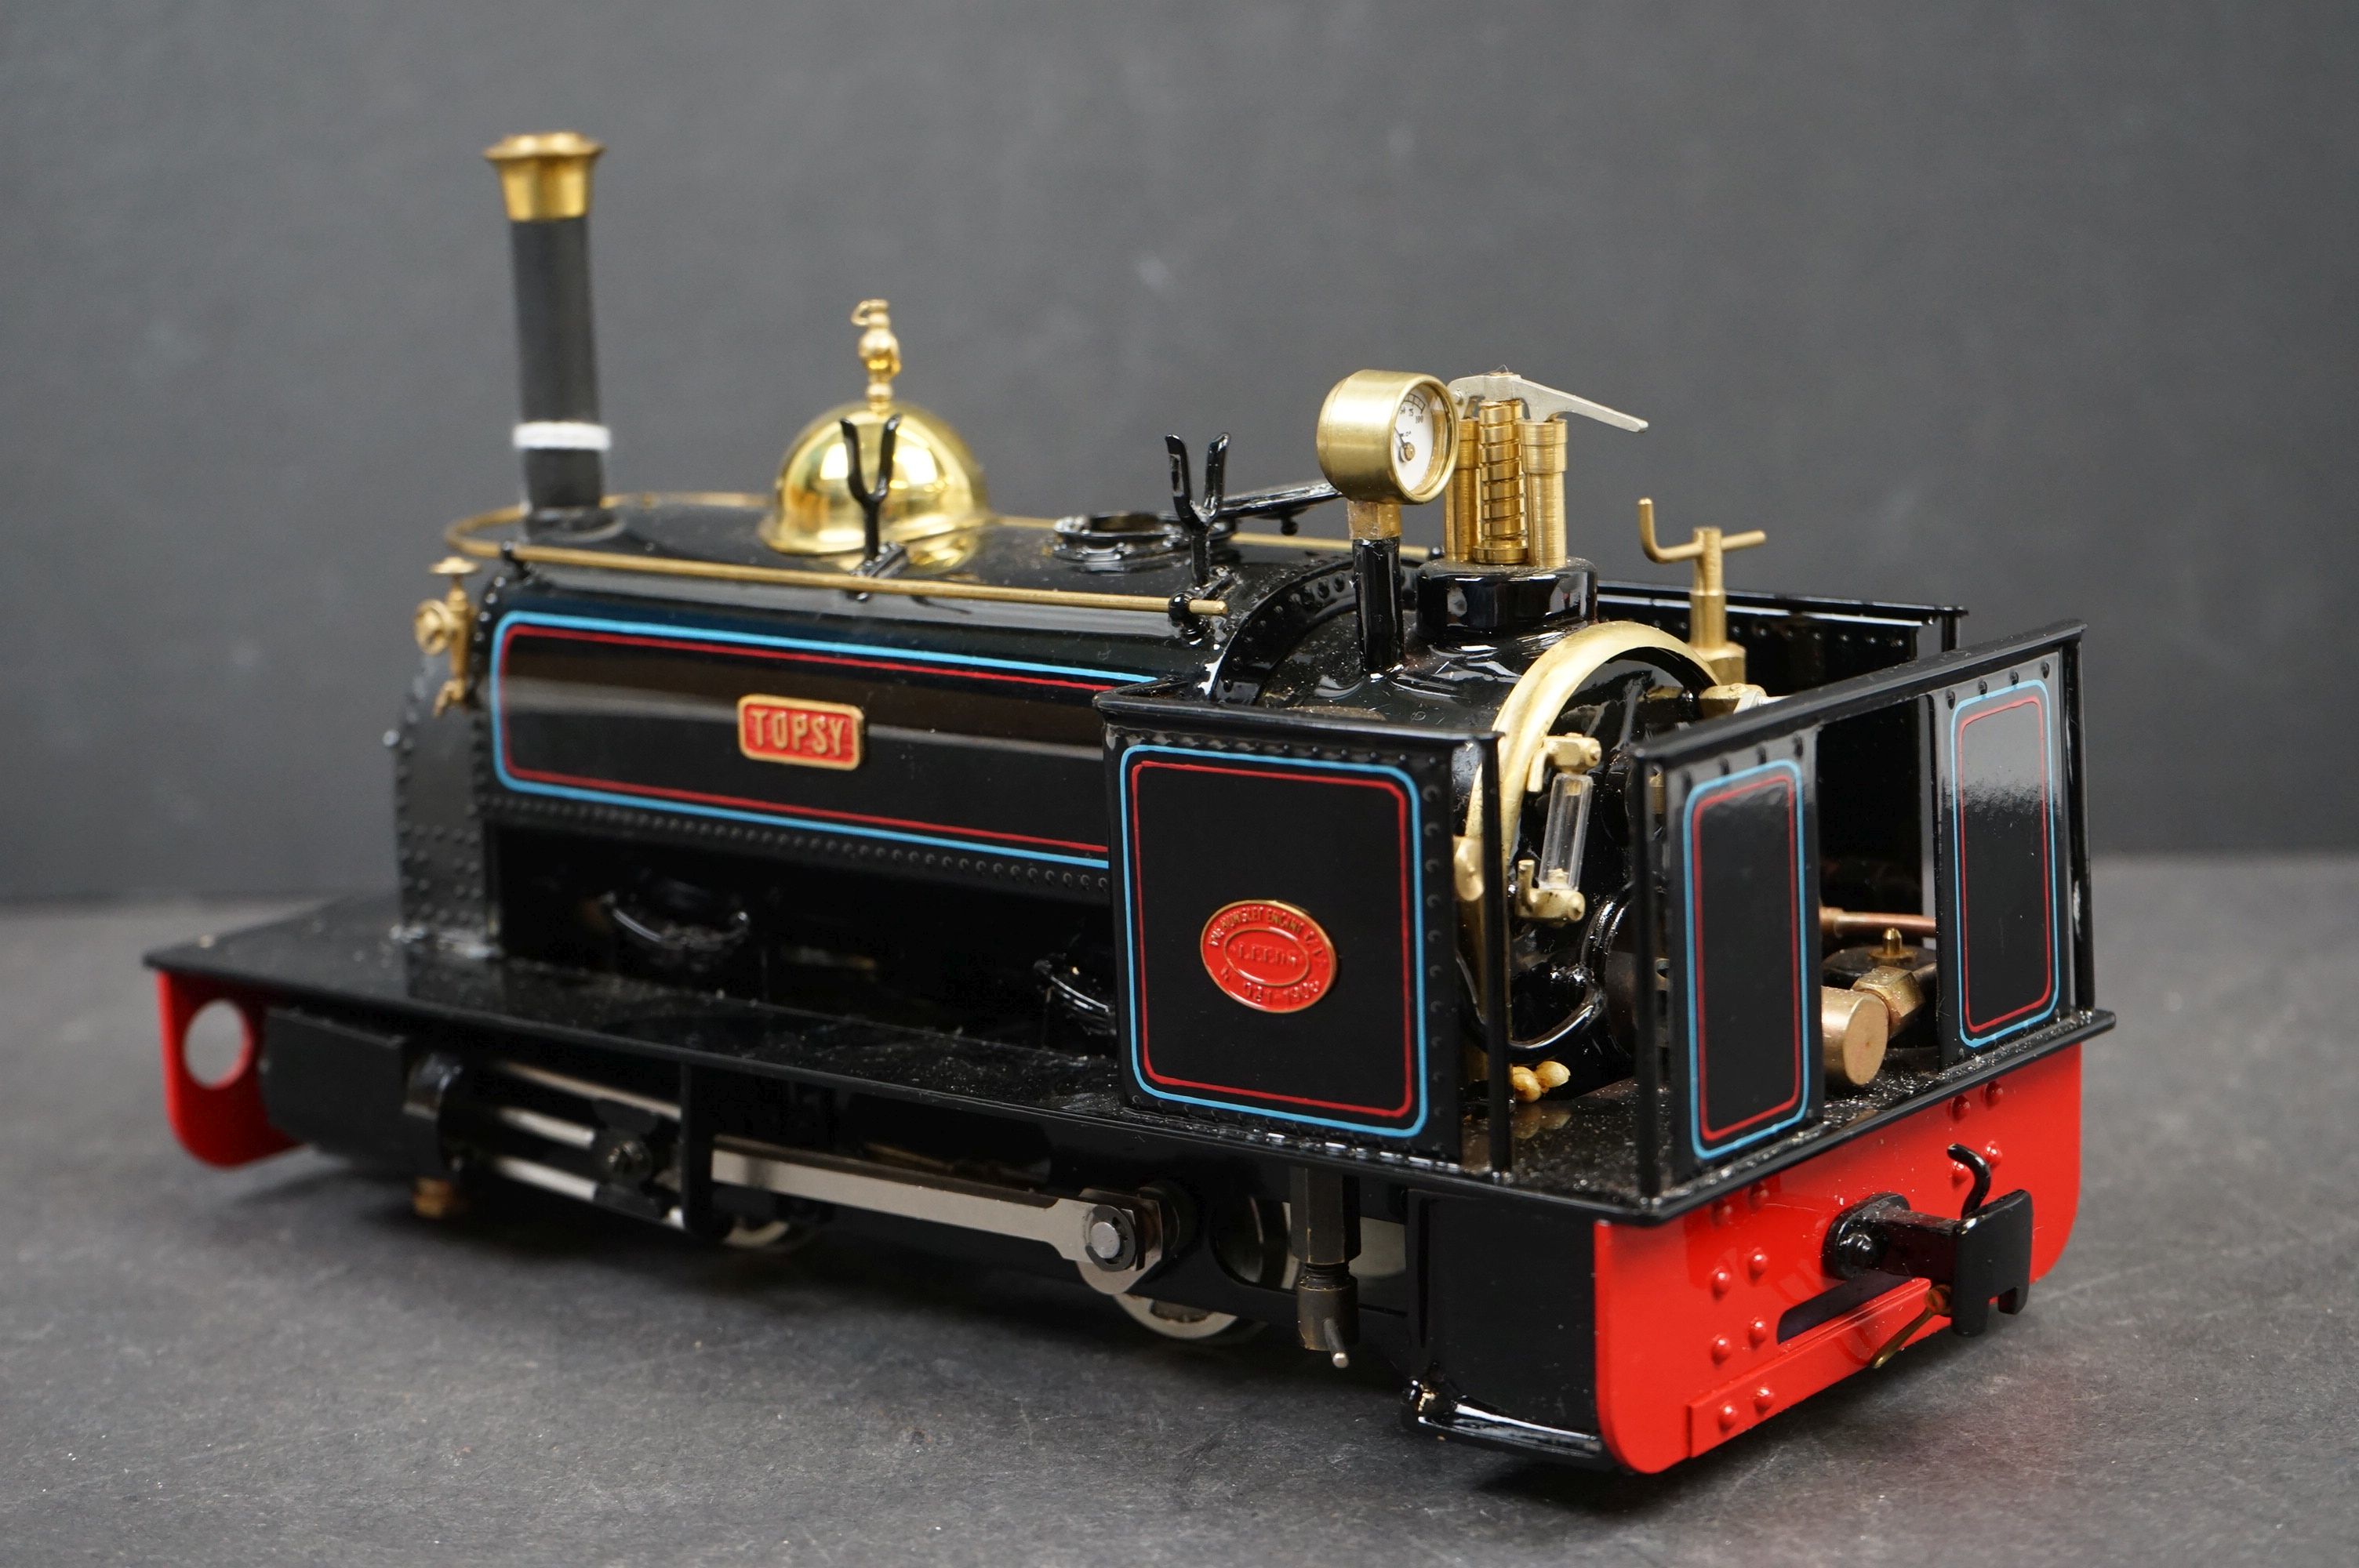 Finescale Engineering Co O Gauge Live Steam 0-4-0 Saddle Tank Locomotive 'Topsy' in black livery, - Image 4 of 7